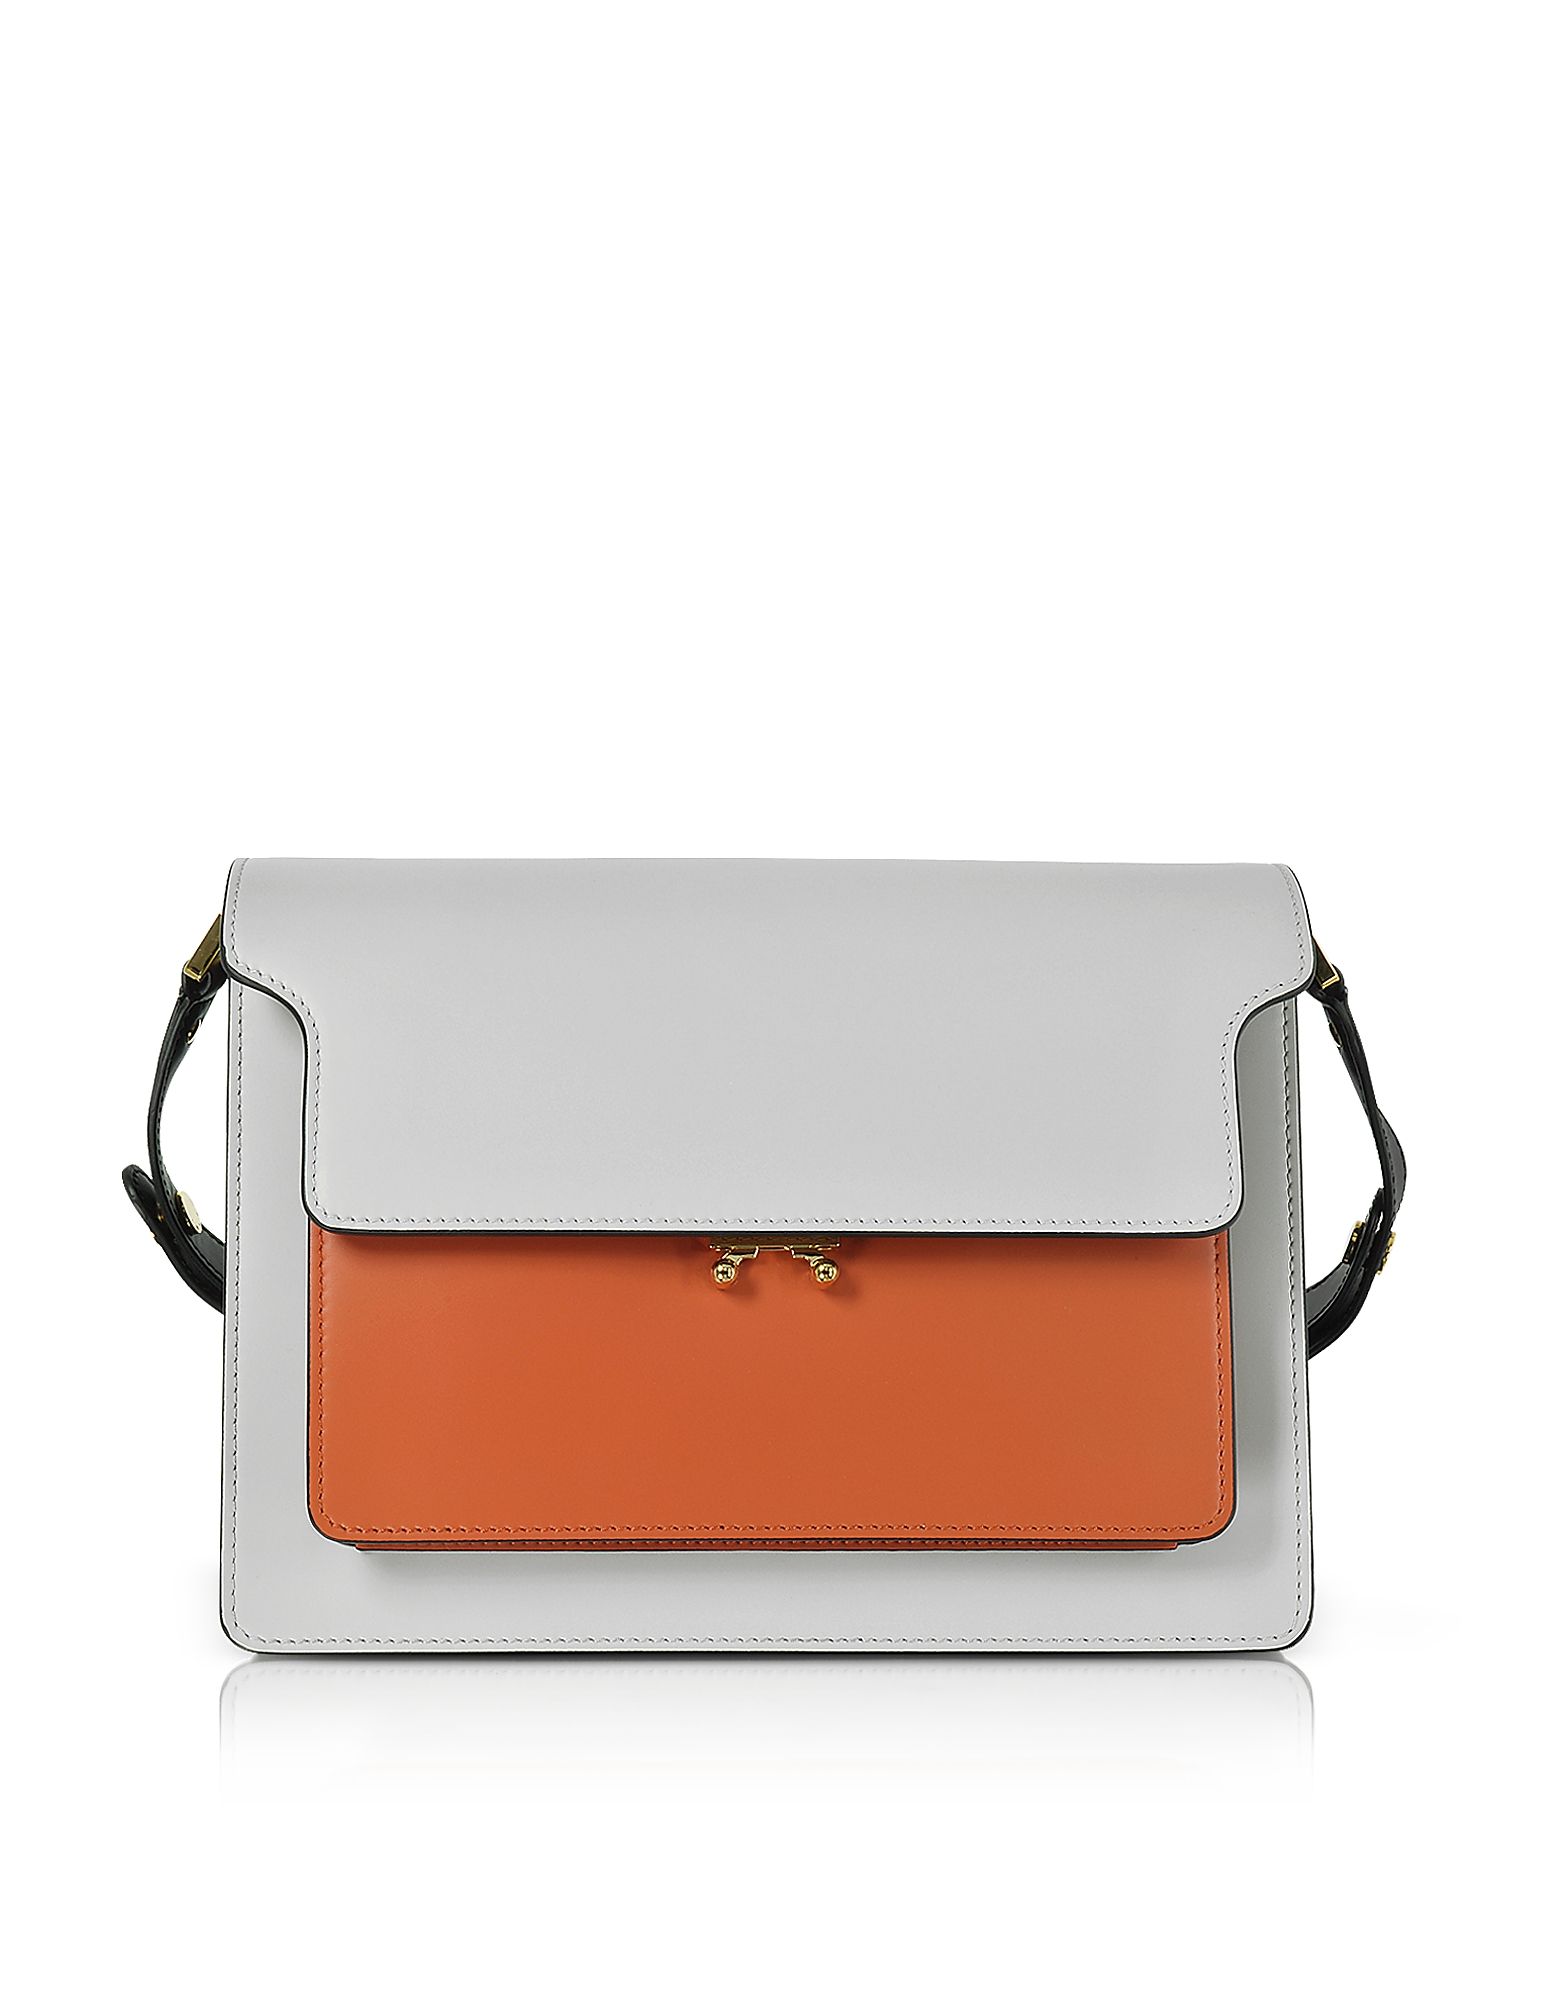 Marni Pelican Gray, Chili Red and Black Leather Large Trunk Bag | Forzieri APAC